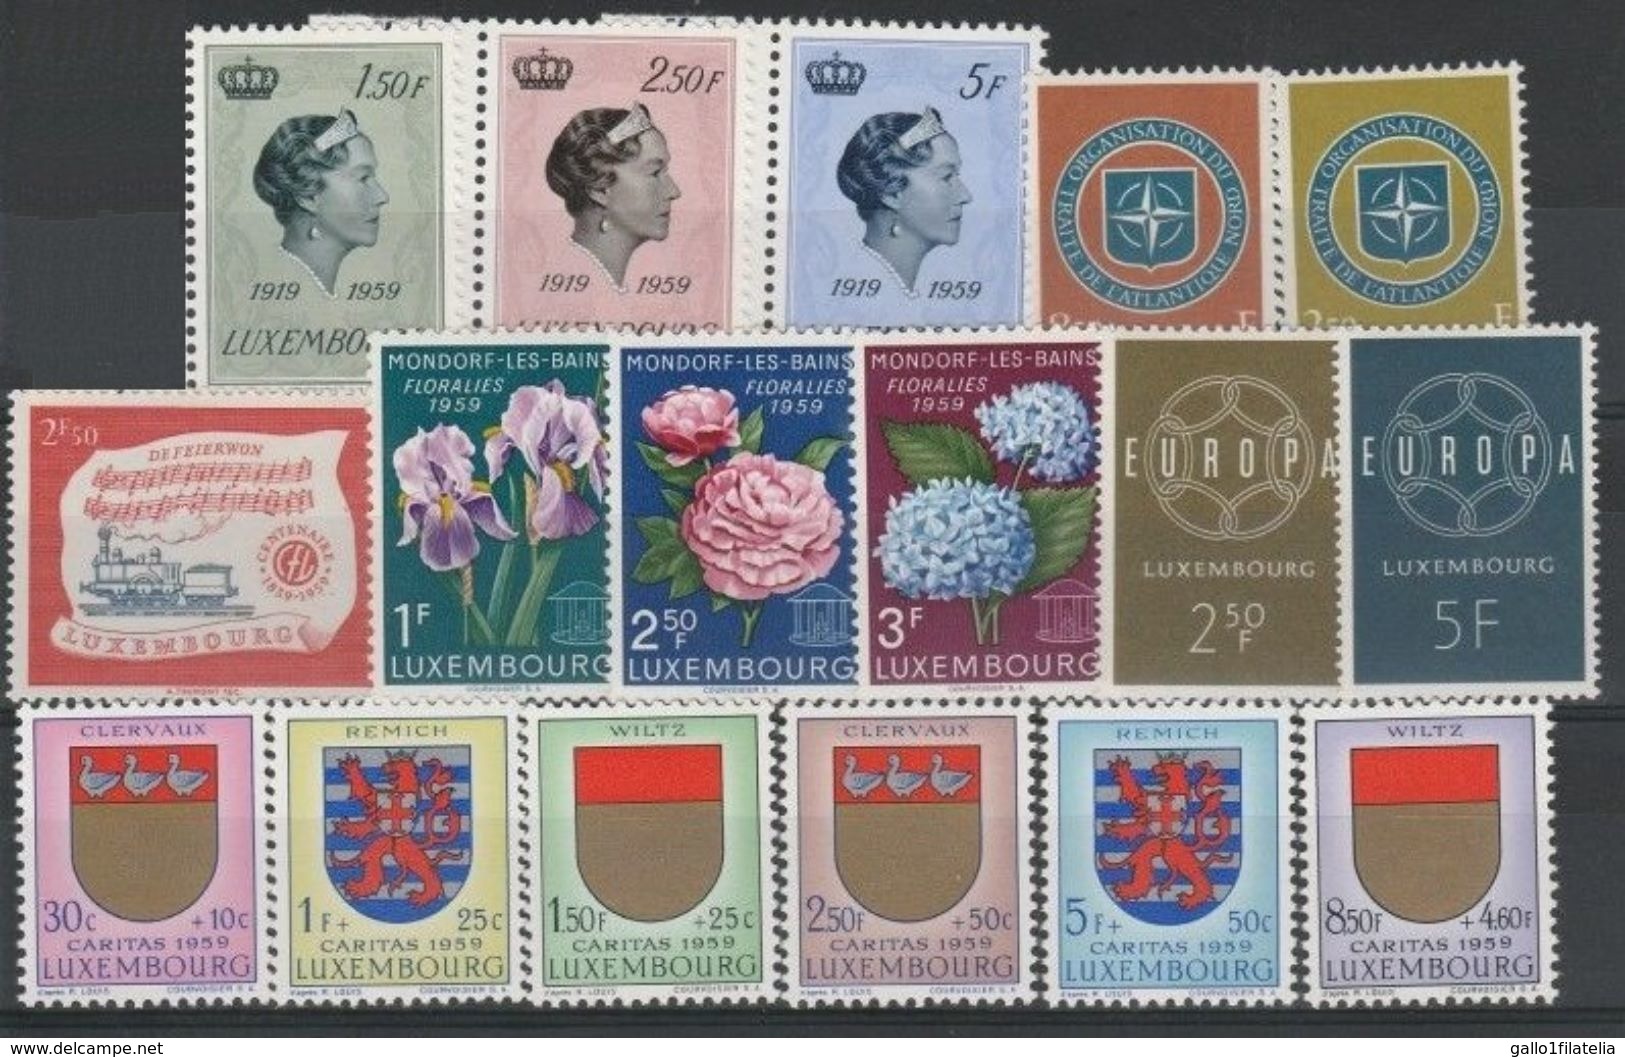 1959-LUSSEMBURGO / LUXEMBOURG-ANNATA COMPLETA / COMPLETE YEAR. MNH - Années Complètes